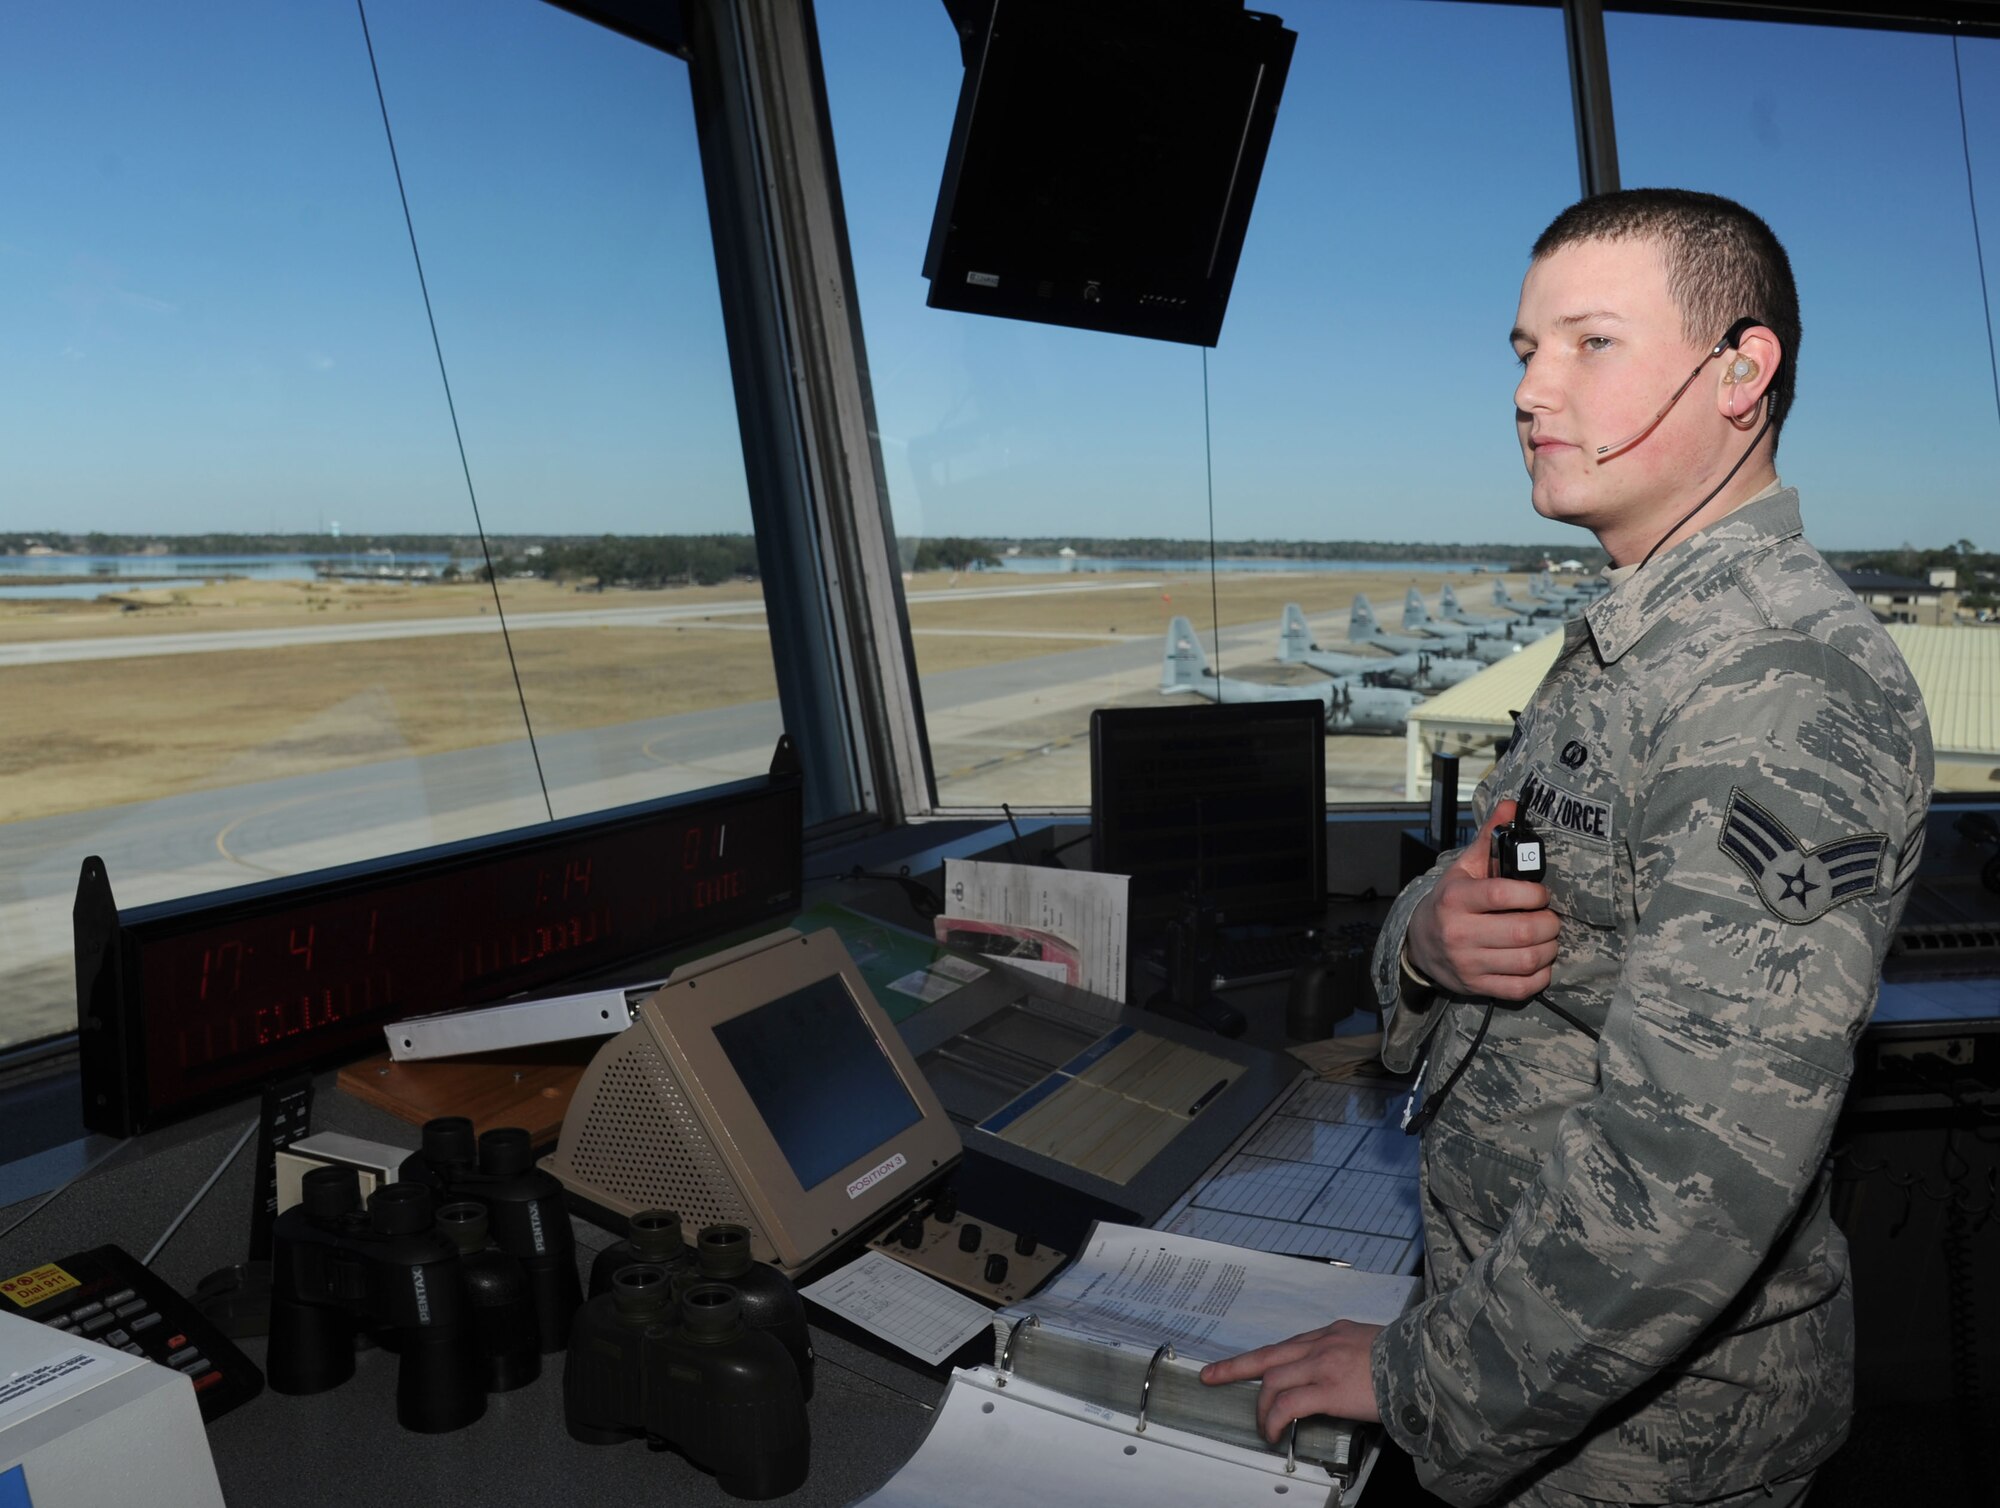 Senior Airman Gavin Hunter, 81st Operations Support Flight air traffic controller, observes the Keesler flight line for approaching aircraft Jan. 22, 2014, inside the Air Traffic Control Tower, Keesler Air Force Base, Miss.  Hunter was one of the first on-scene responders to a vehicle accident Nov. 23, 2013, on highway 67.  (U.S. Air Force photo by Kemberly Groue)